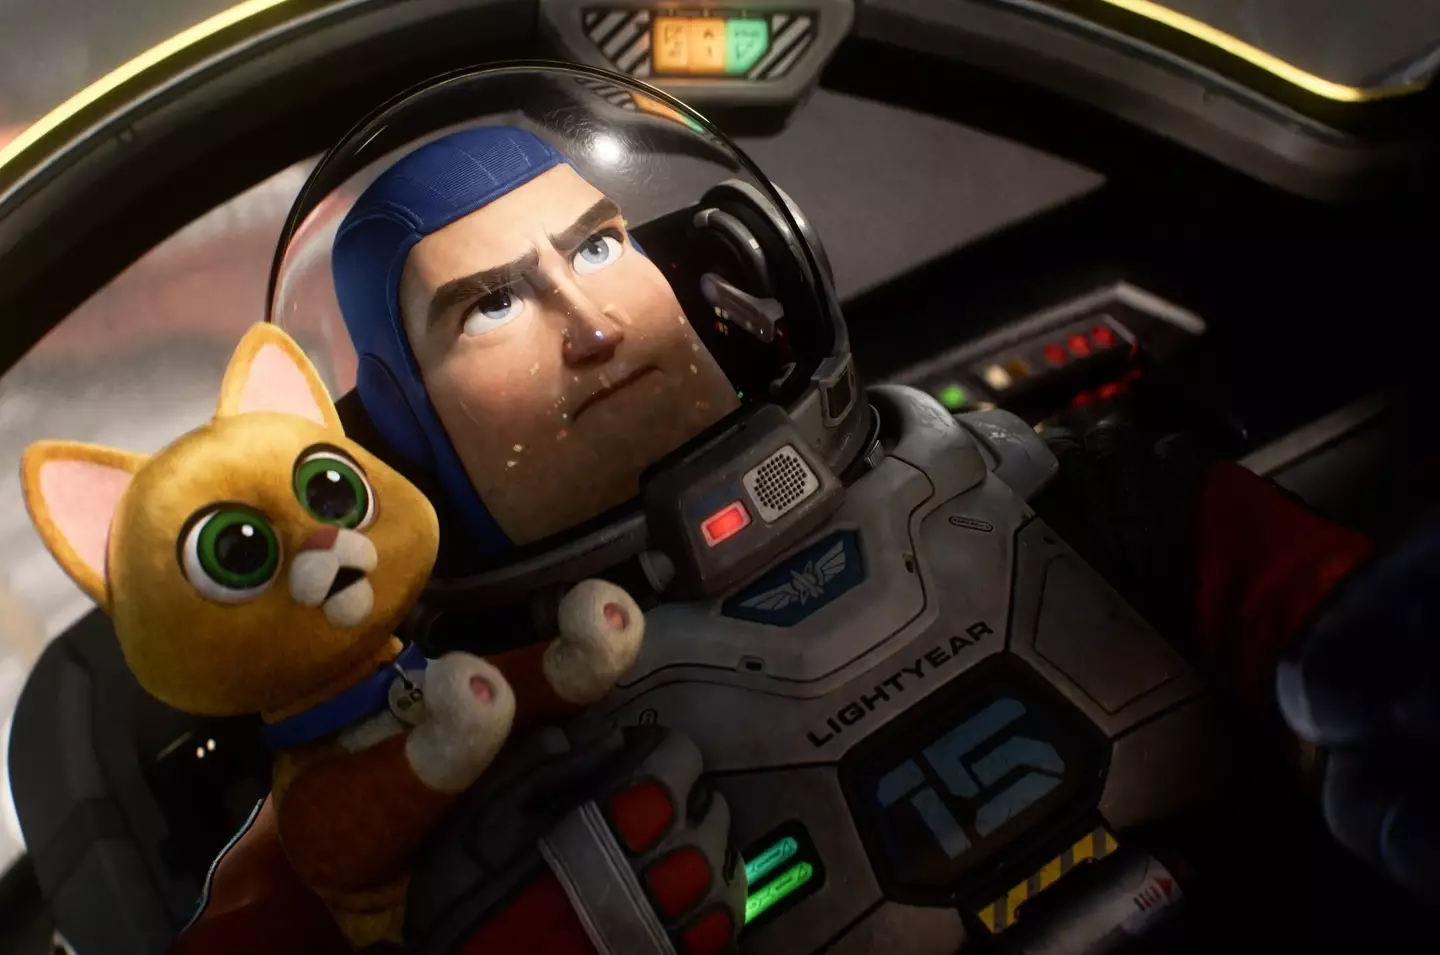 Chris Evans replaced Tim Allen as the voice of Buzz in the new Lightyear Movie.